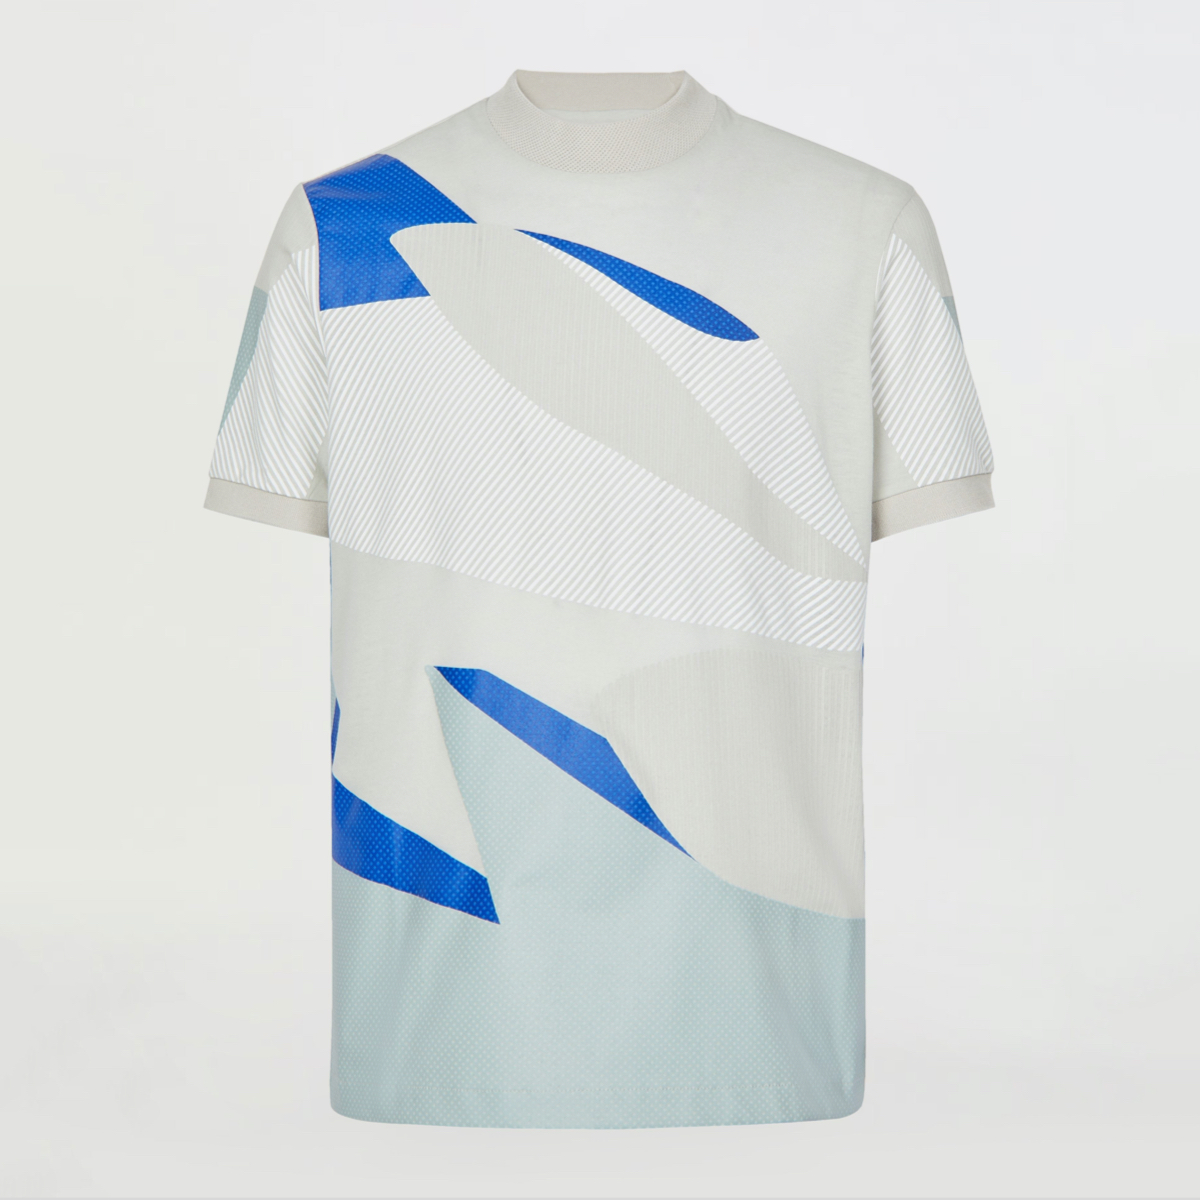 White and blue T-shirt